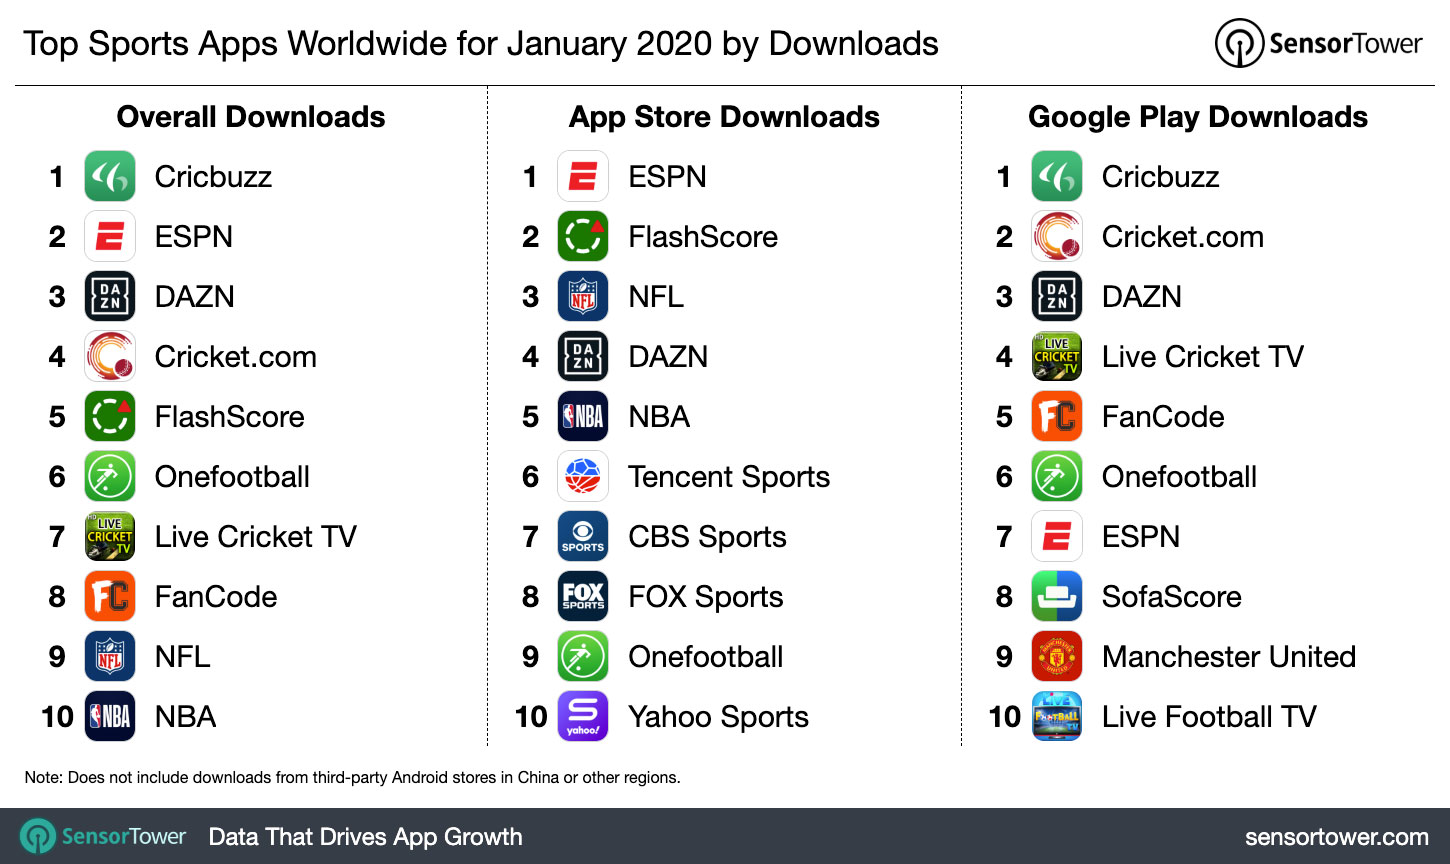 Top Sports Apps Worldwide for January 2020 by Downloads